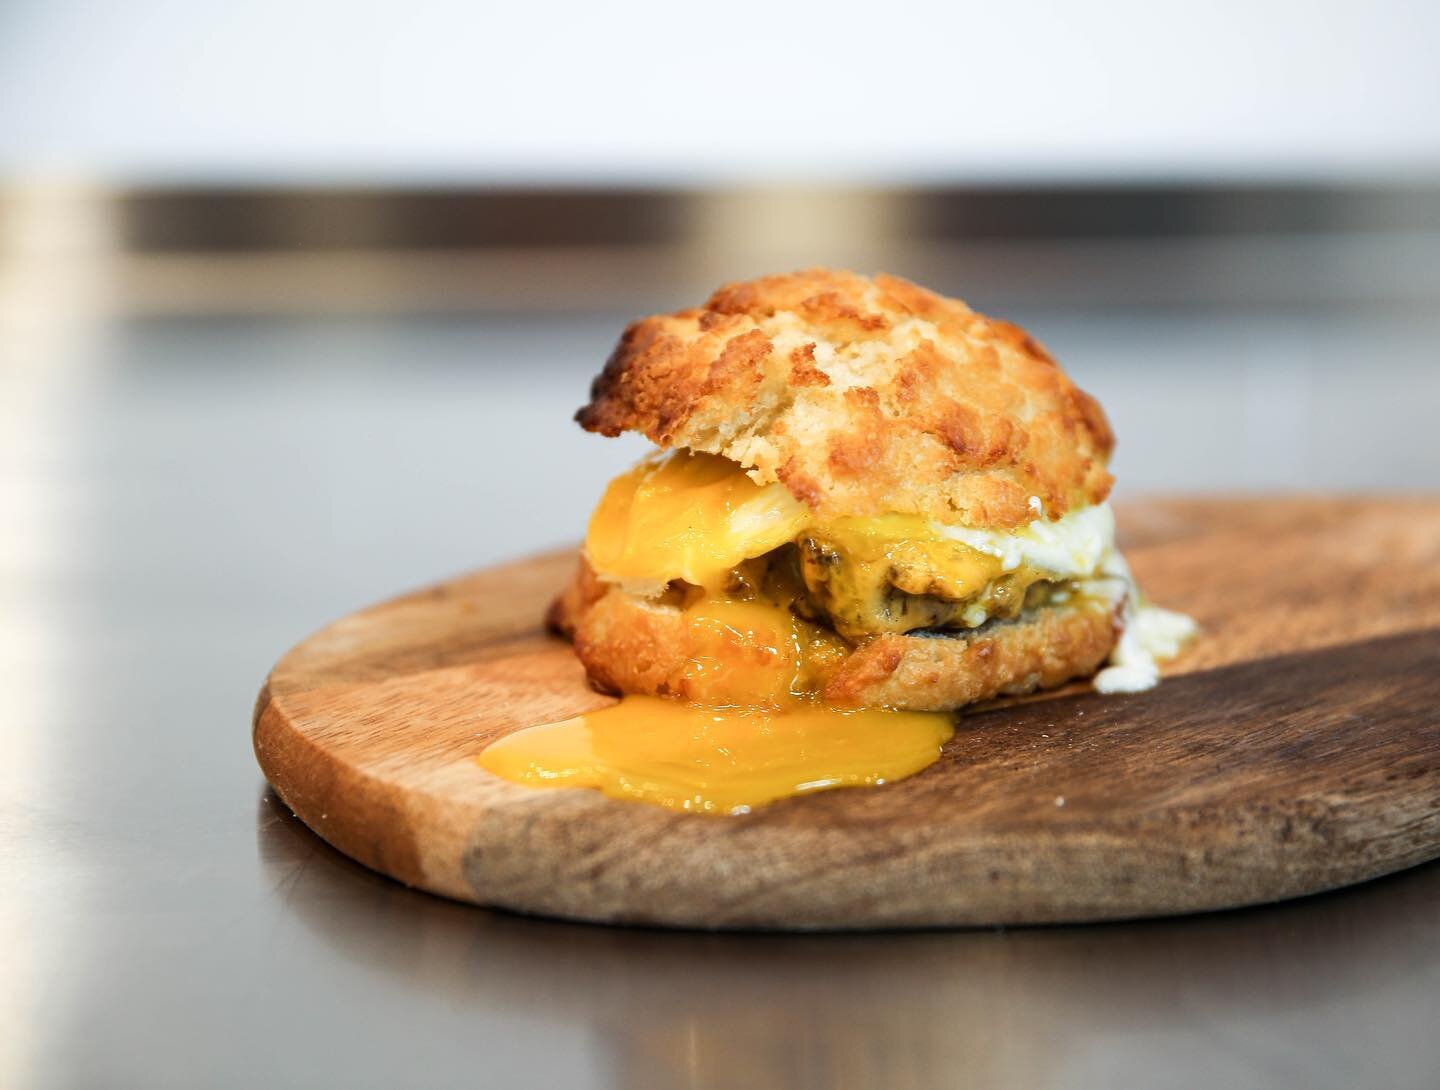 Anytime can be breakfast time - that&rsquo;s why we serve up our breakfast sandwich all day long. 

Breakfast sausage &bull; wood-fired egg &bull; cheddar &bull; house biscuit

#chopshopparkcity #breakfastsandwich #parkcity #butchersofinstagram